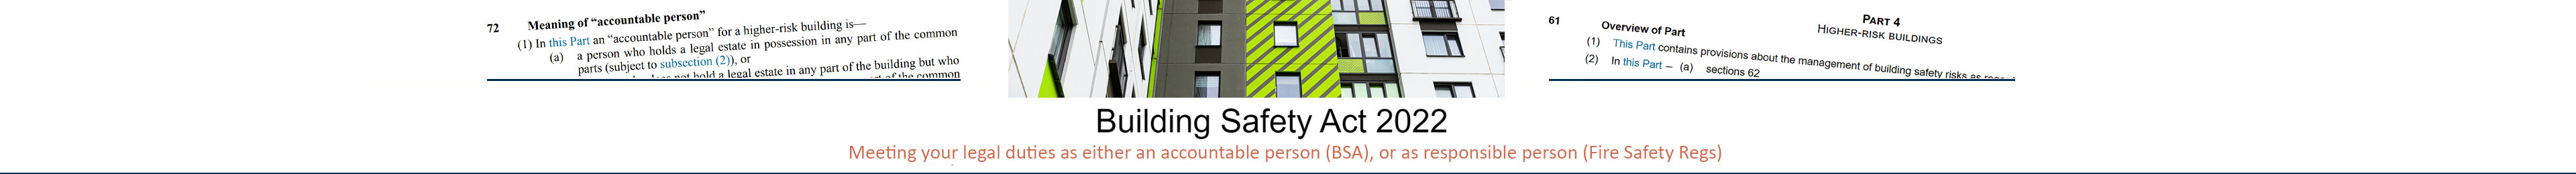 Building Safety Act 2022: The accountable Person